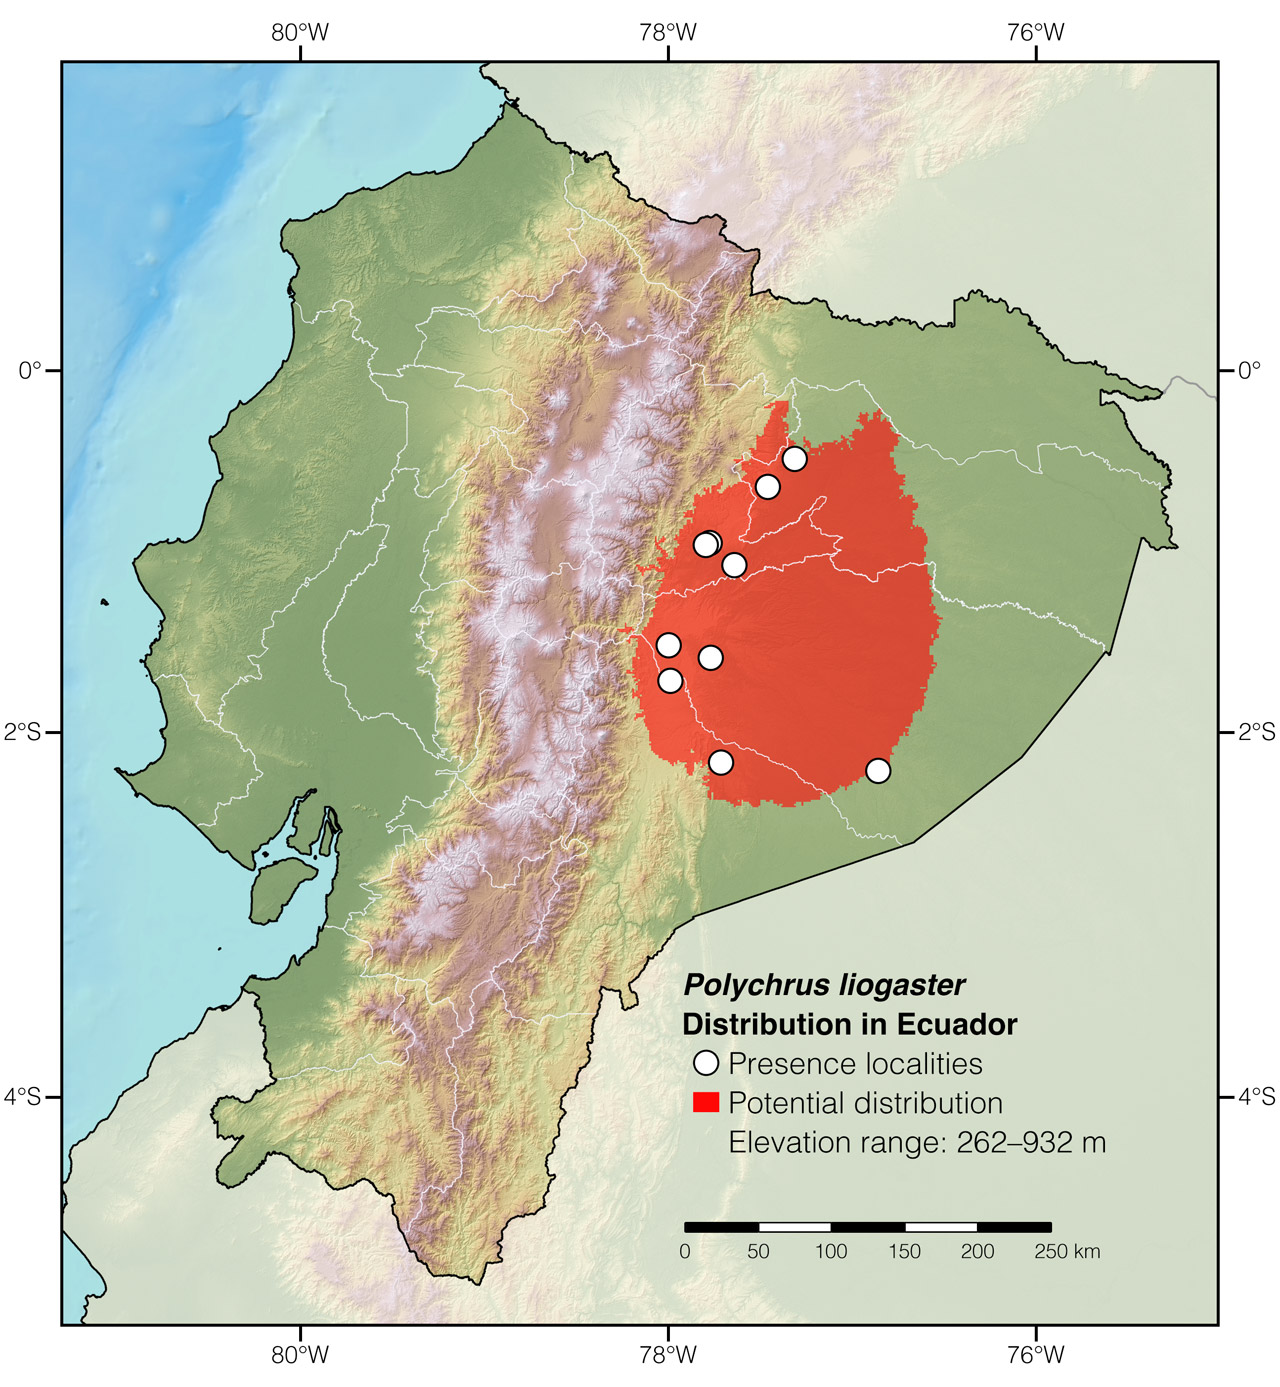 Distribution of Polychrus liogaster in Ecuador